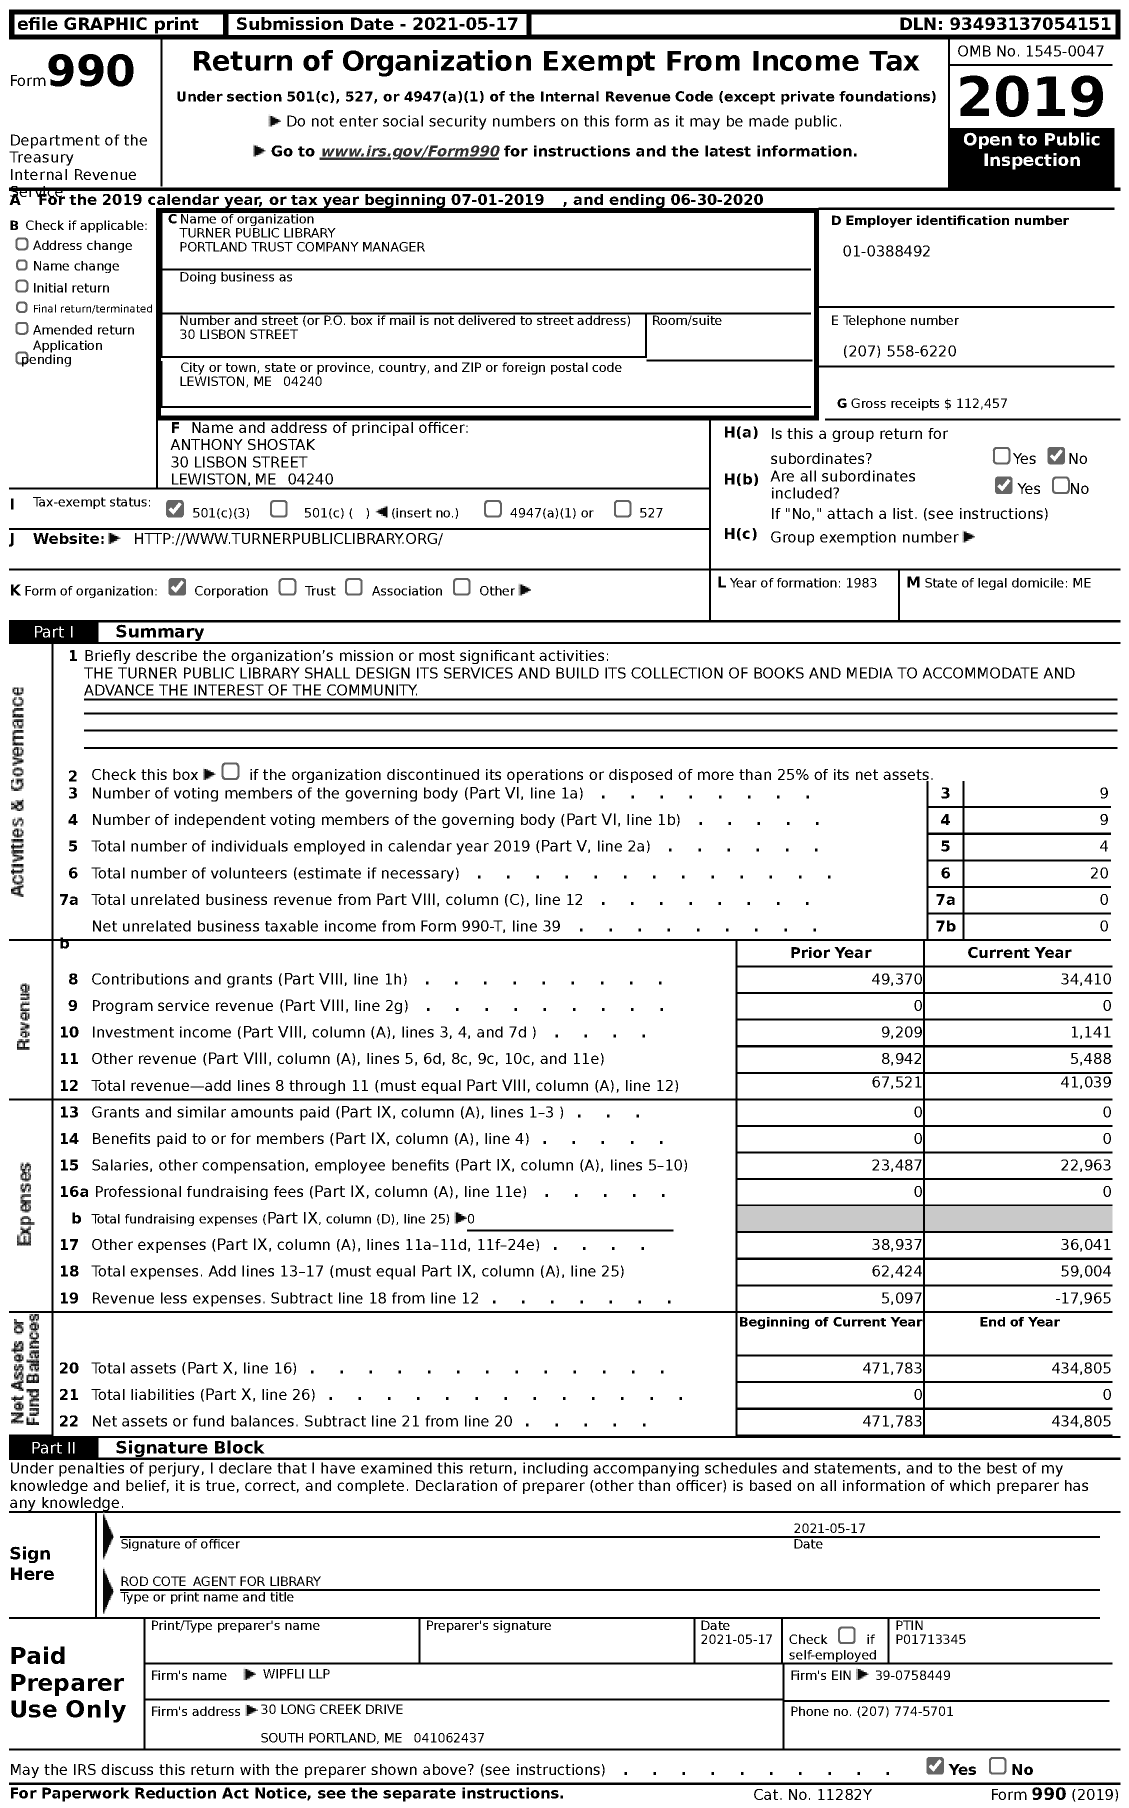 Image of first page of 2019 Form 990 for Turner Public Library Portland Trust Company Manager